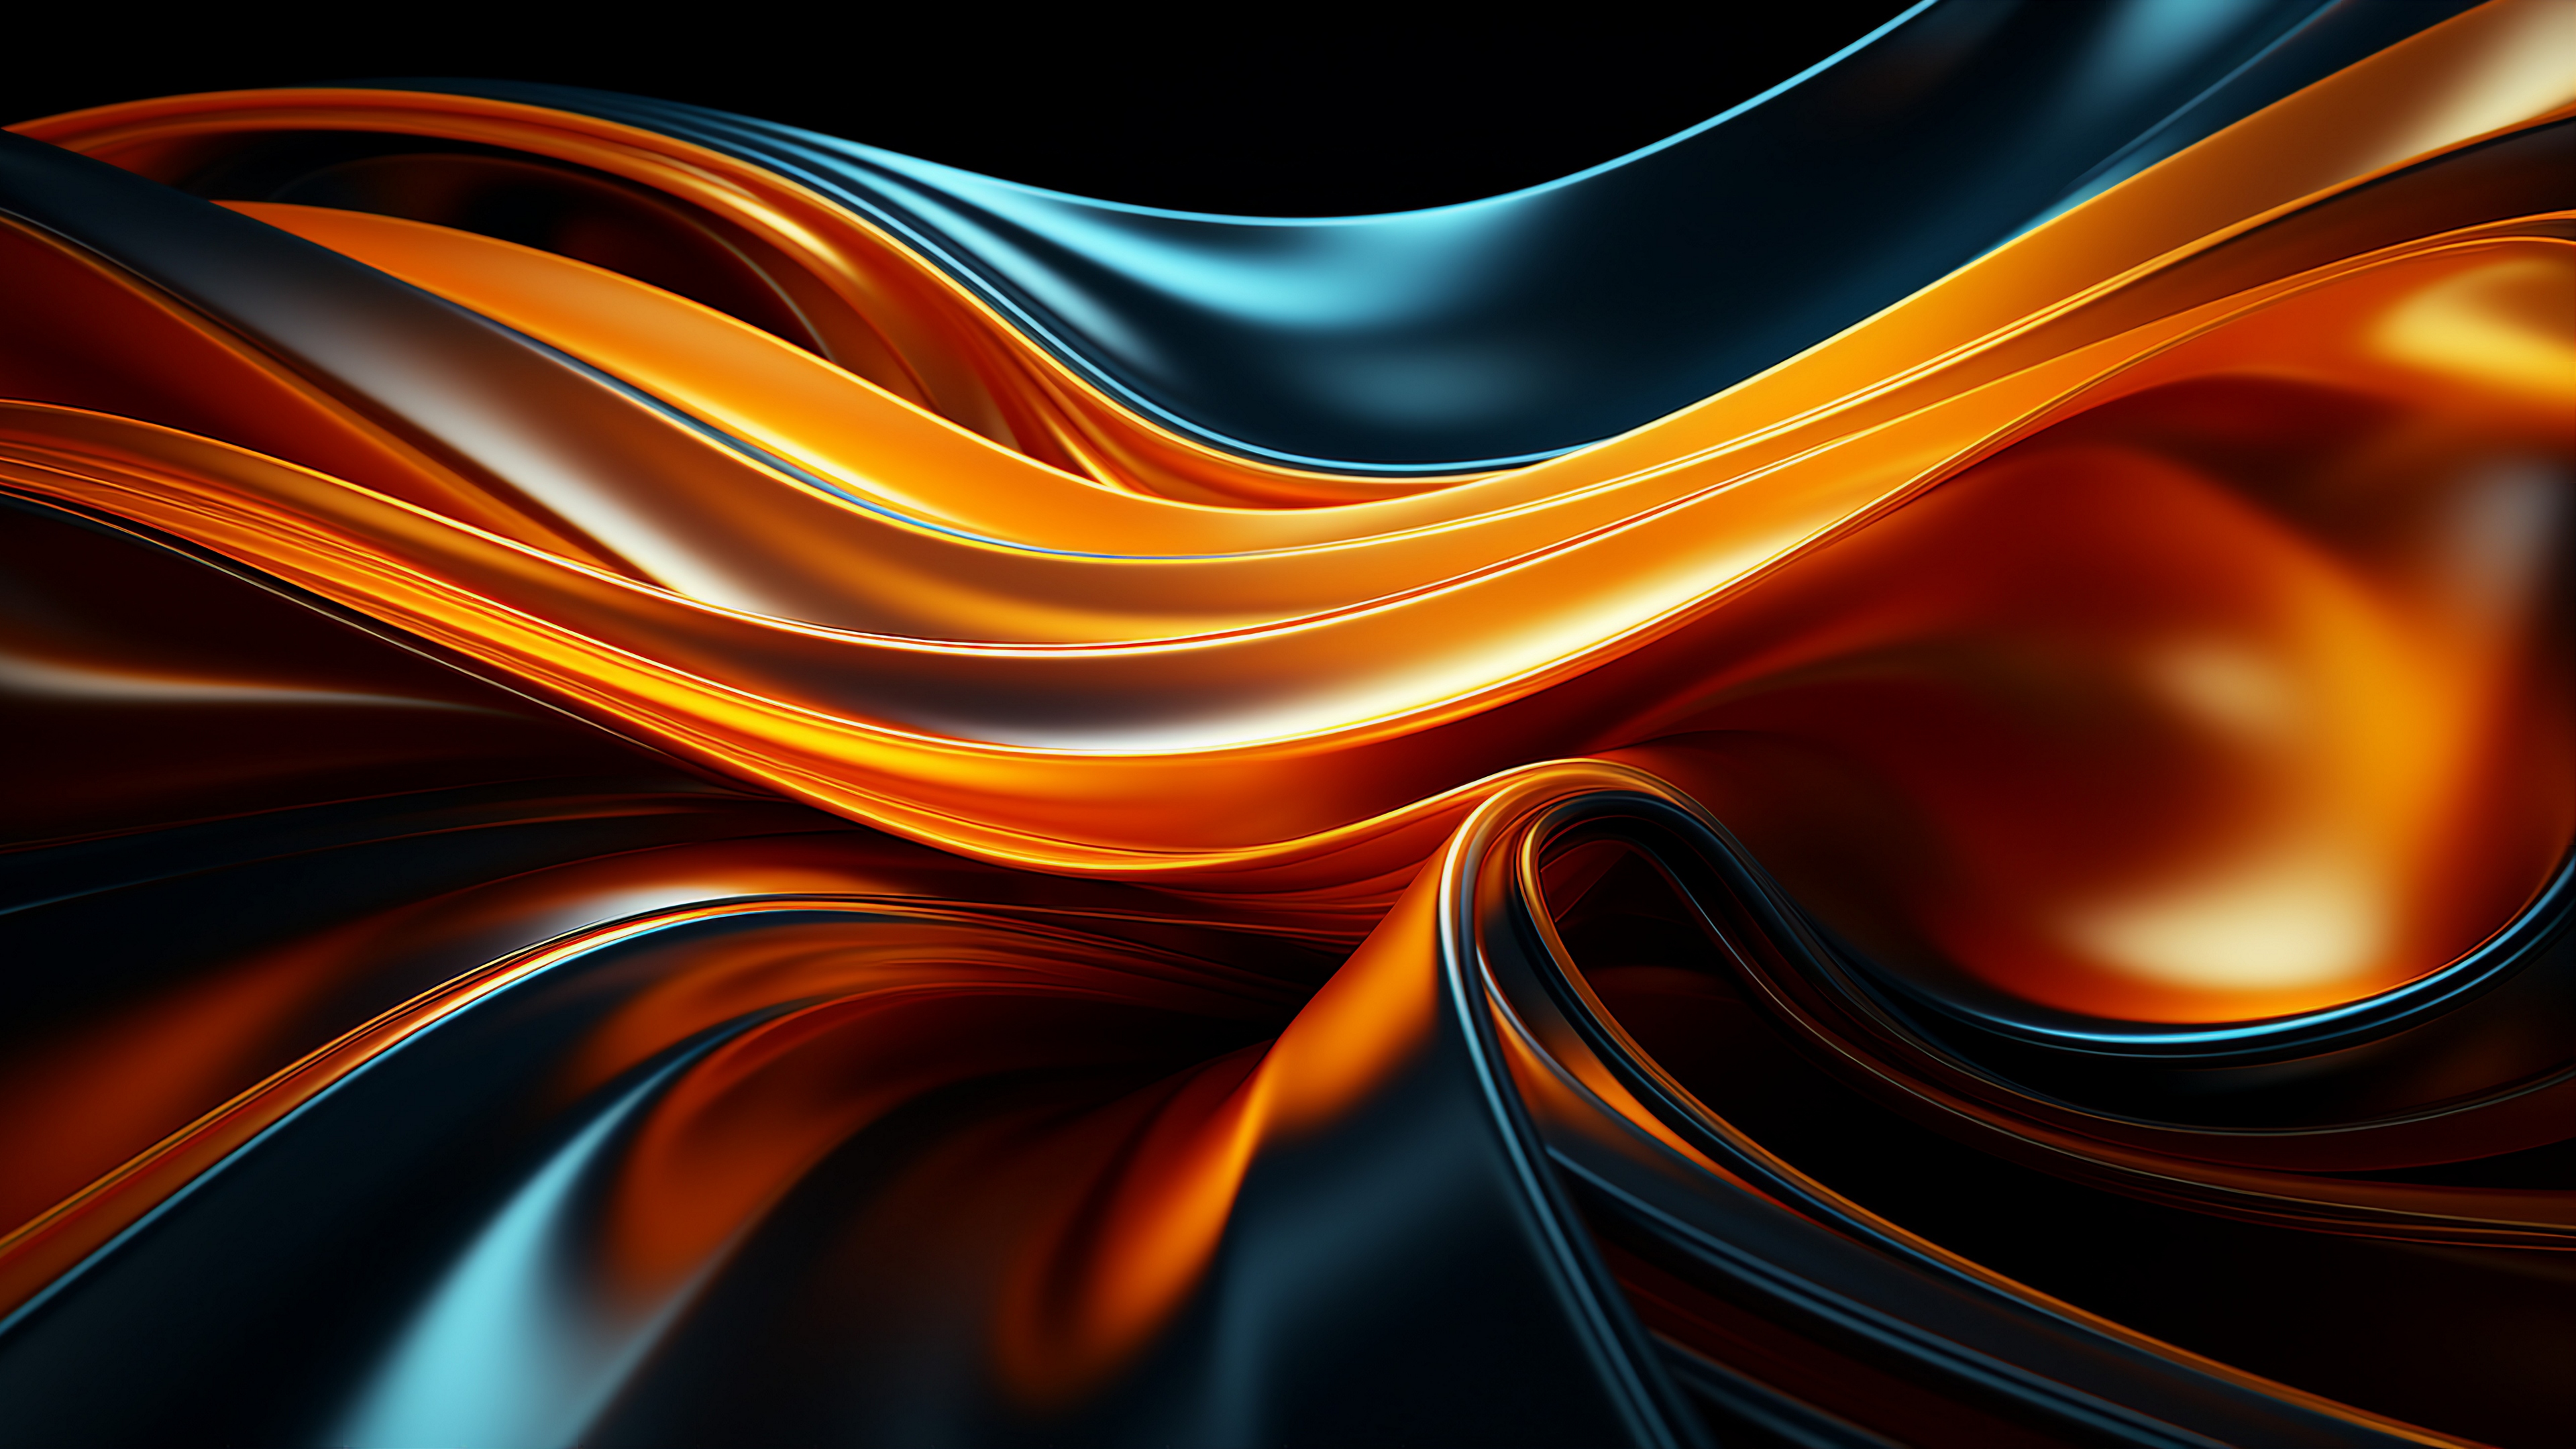 General 3840x2160 abstract waveforms shapes minimalism simple background digital art